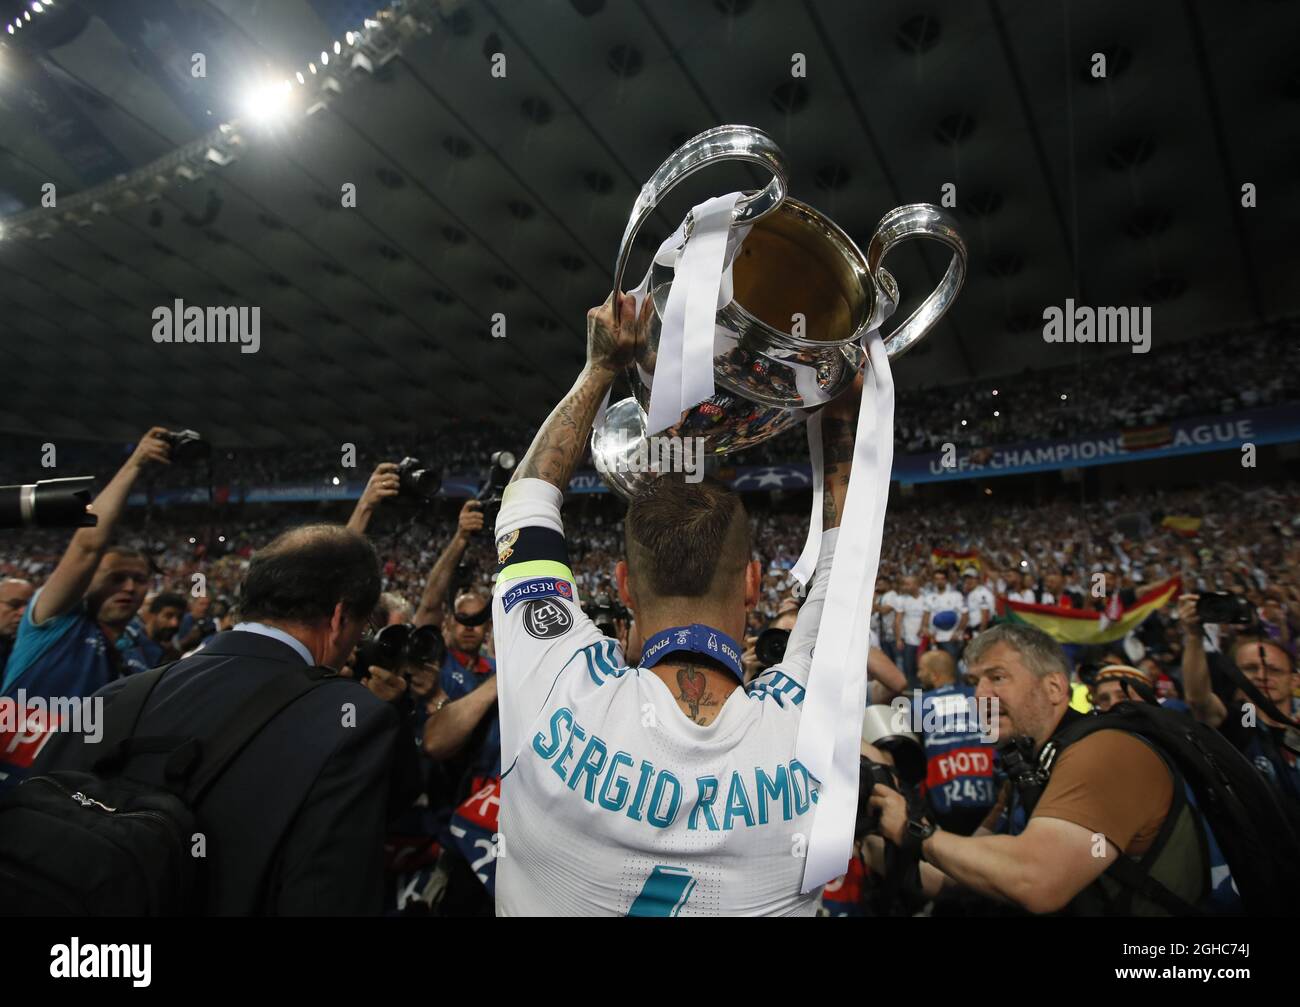 Sergio Ramos of Real Madrid holds aloft the UEFA Champions League Trophy  during the UEFA Champions League Final match at the NSK Olimpiyskiy  Stadium, Kiev. Picture date 26th May 2018. Picture credit